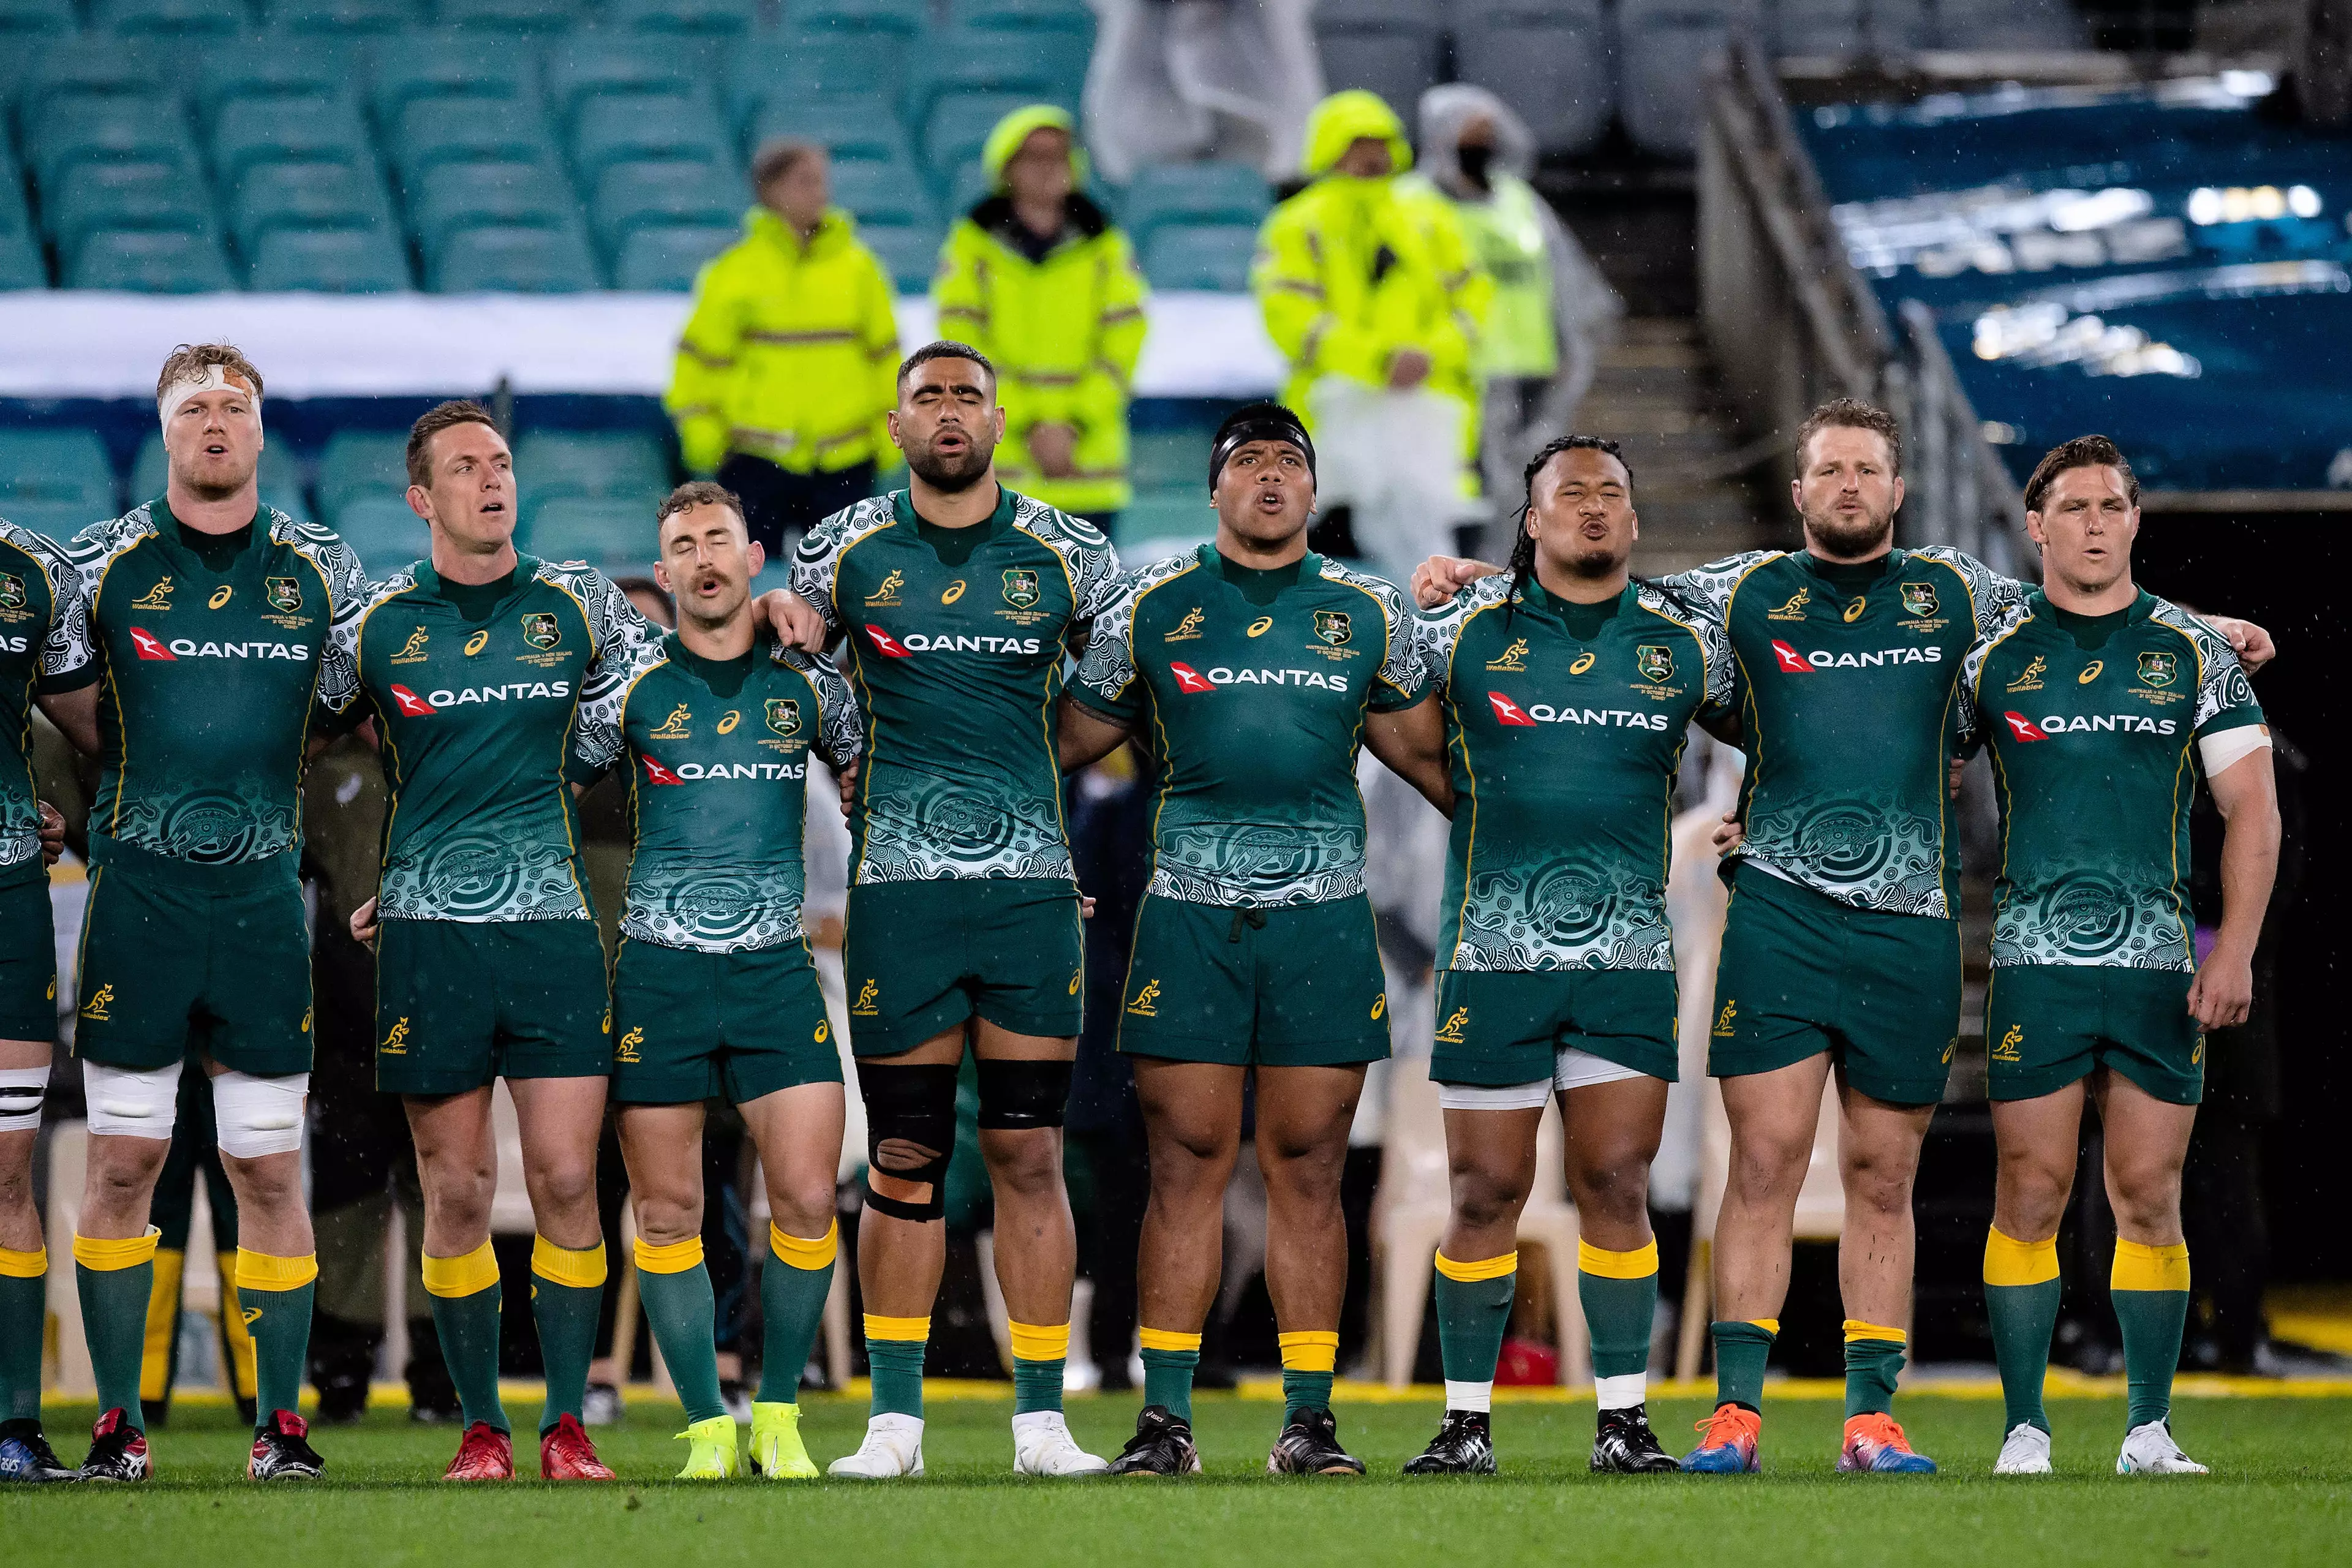 The Wallabies sing along to the anthem.